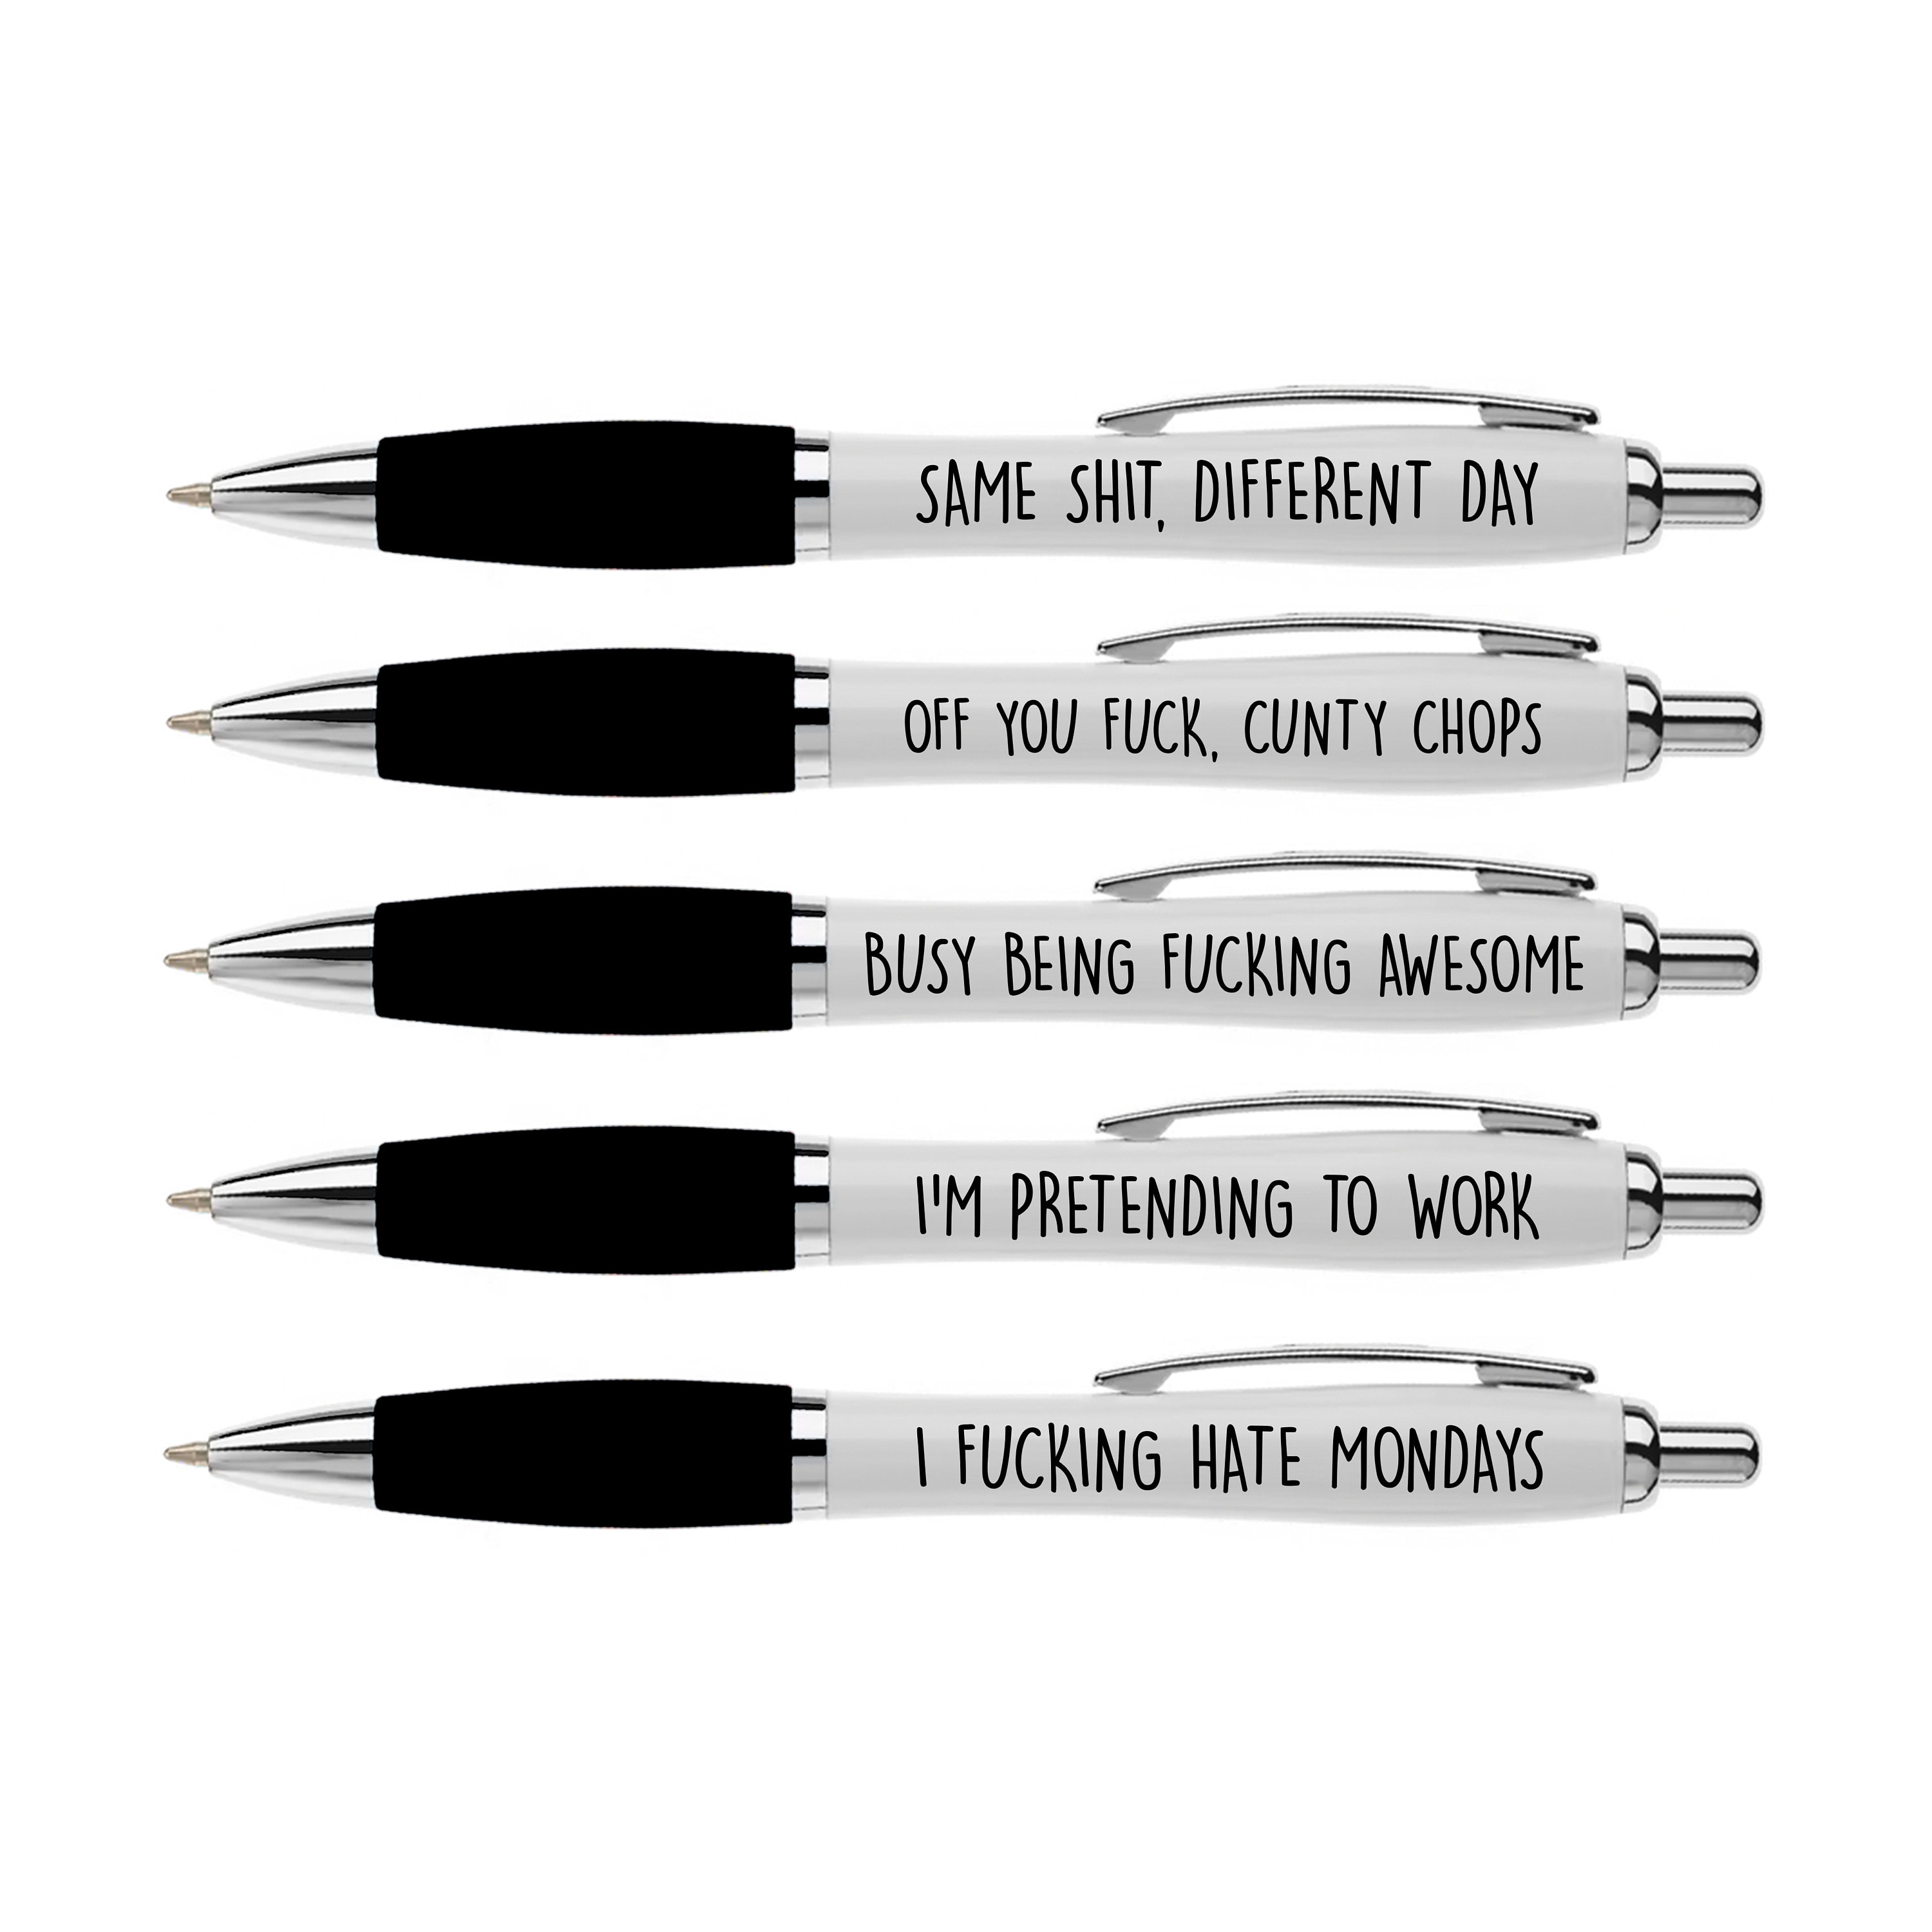 Rude Pens For Adults | Funny Boss Gifts Leaving Presents For Colleagues |  Silly Ballpoint Pen Novelty Funky Stationery Quirky Gift Office Desk